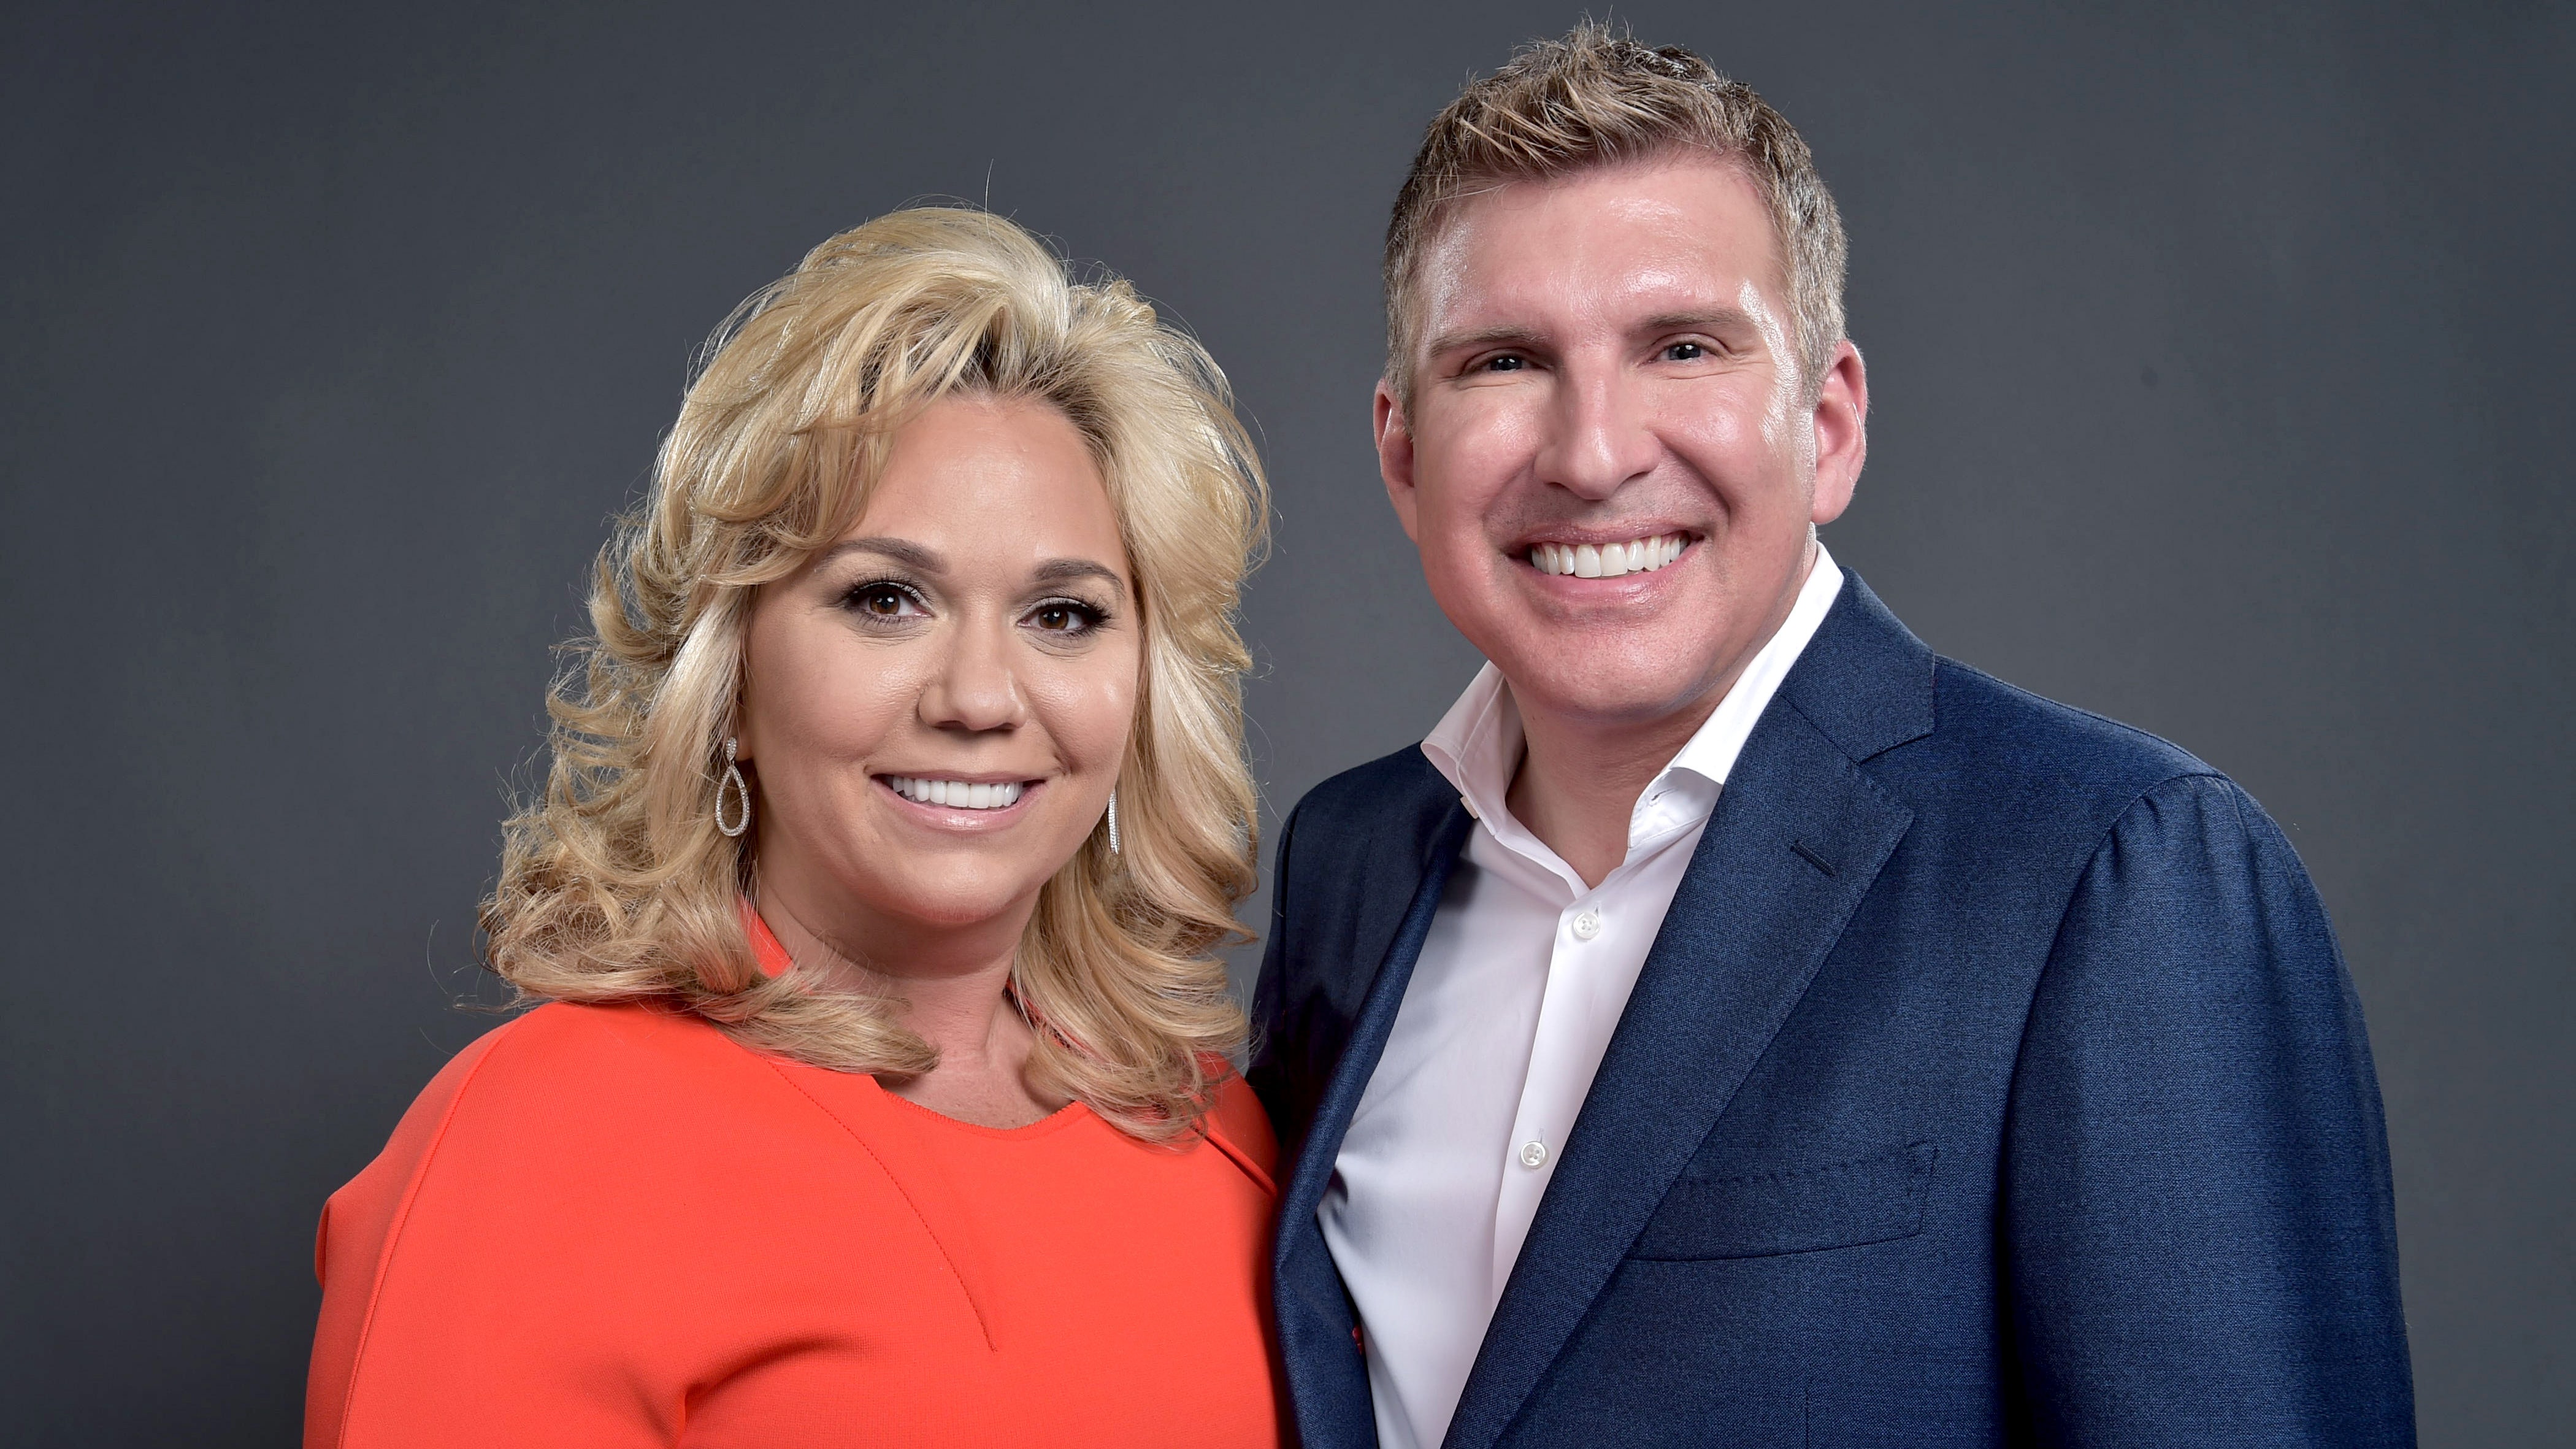 Todd and Julie Chrisley both reported to prison in January for bank fraud and tax evasion charges, but have had their sentences reduced due to good behavior. (Mike Windle/NBCUniversal via Getty Images)